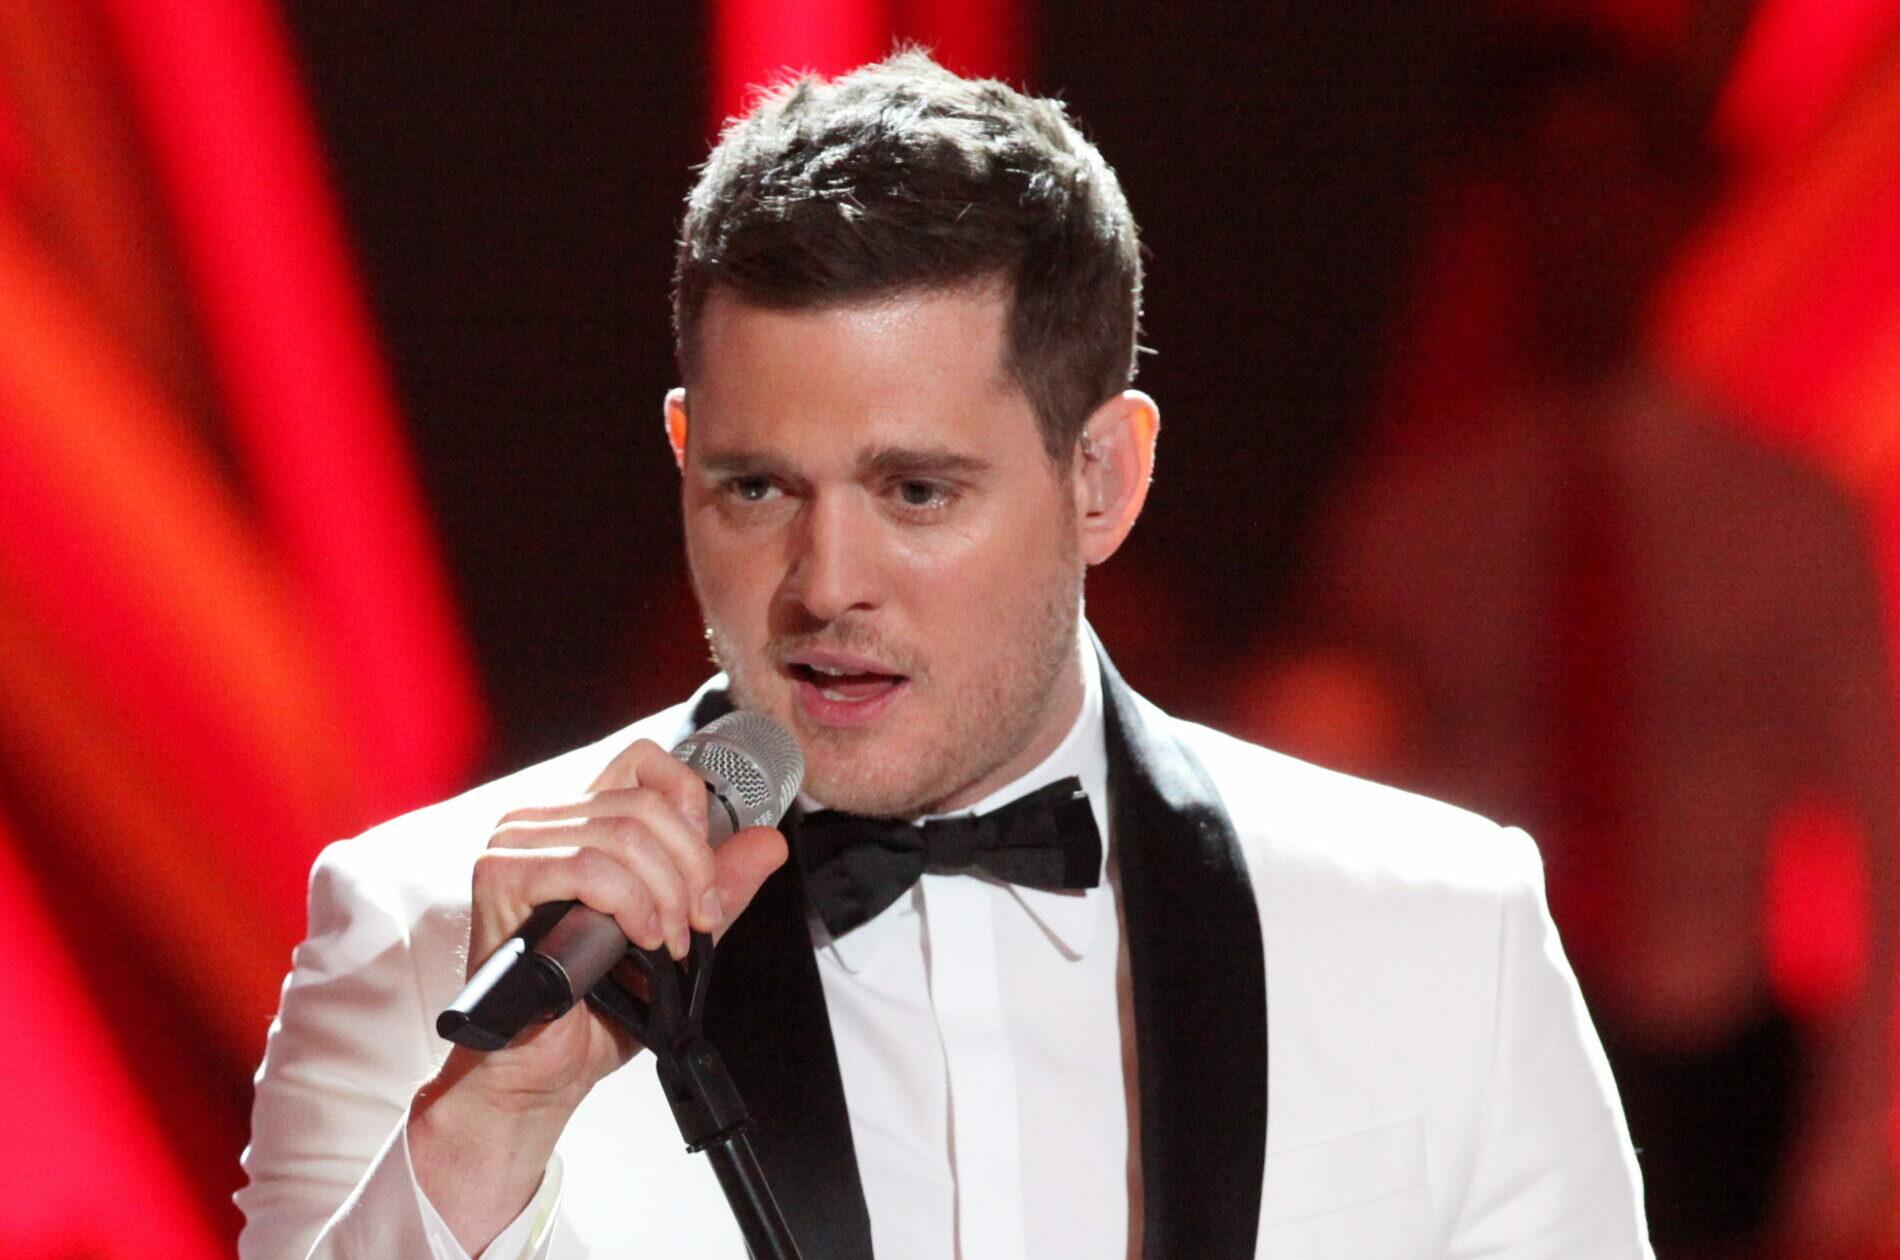 Michael Buble's wife Luisana Lopilato gave birth to the couple's second child on Friday..